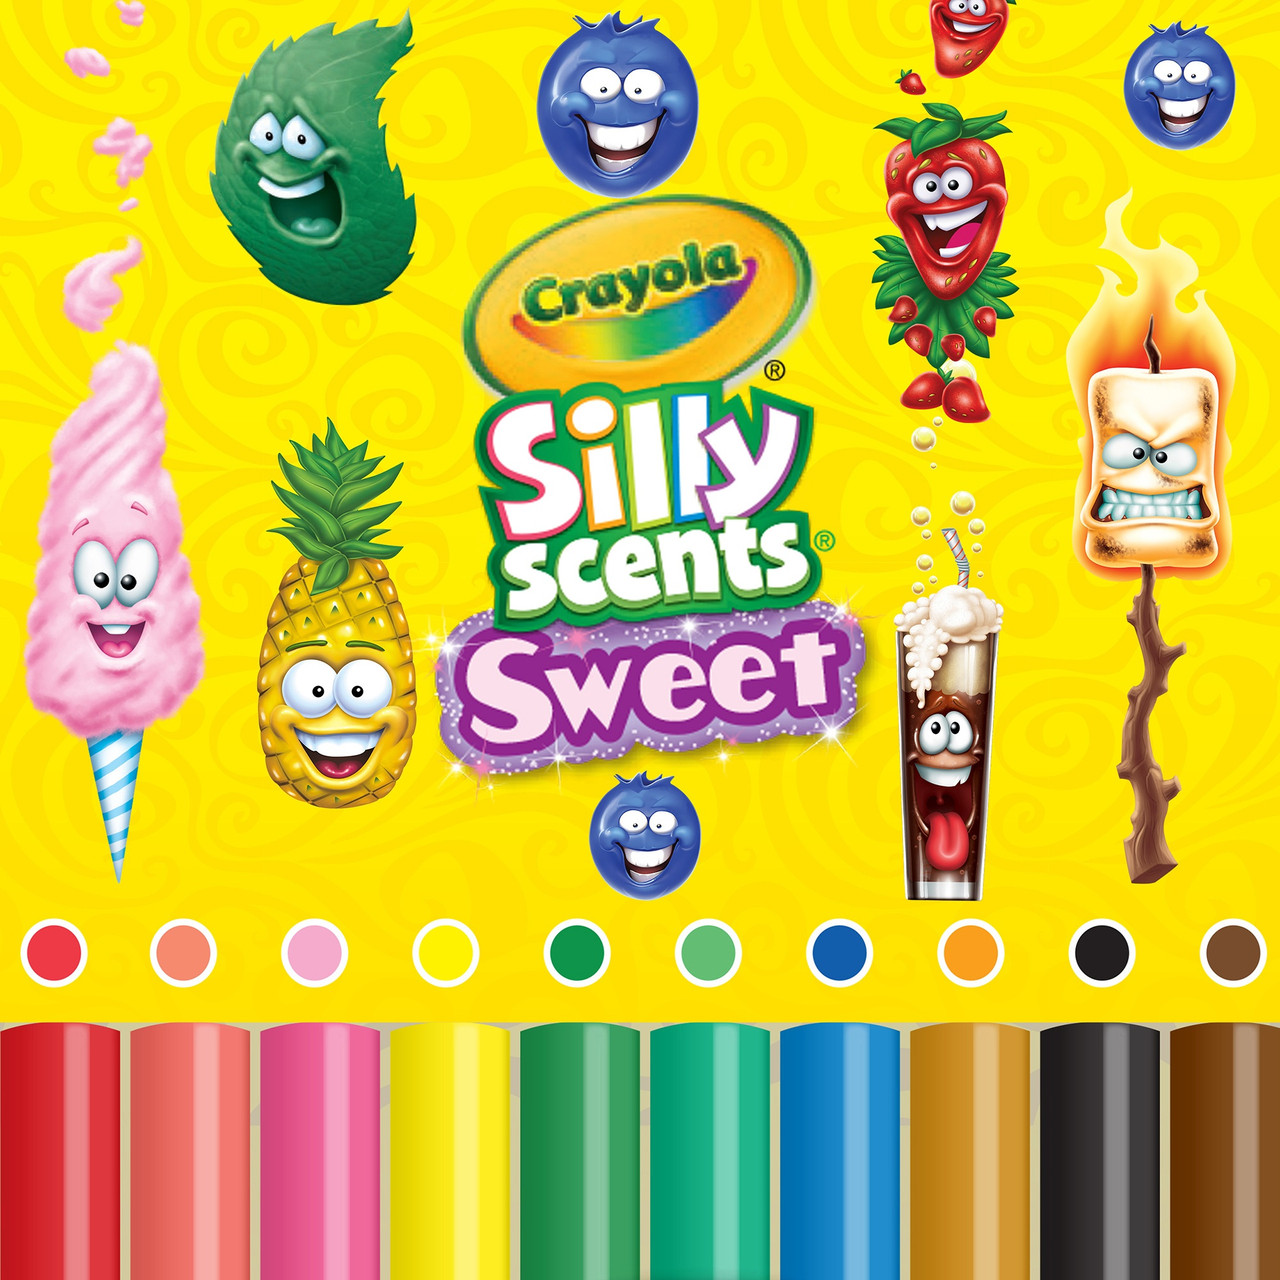 Crayola Silly Scents Washable Markers, Chisel Tip, 12 Per Pack, 3-Pack at